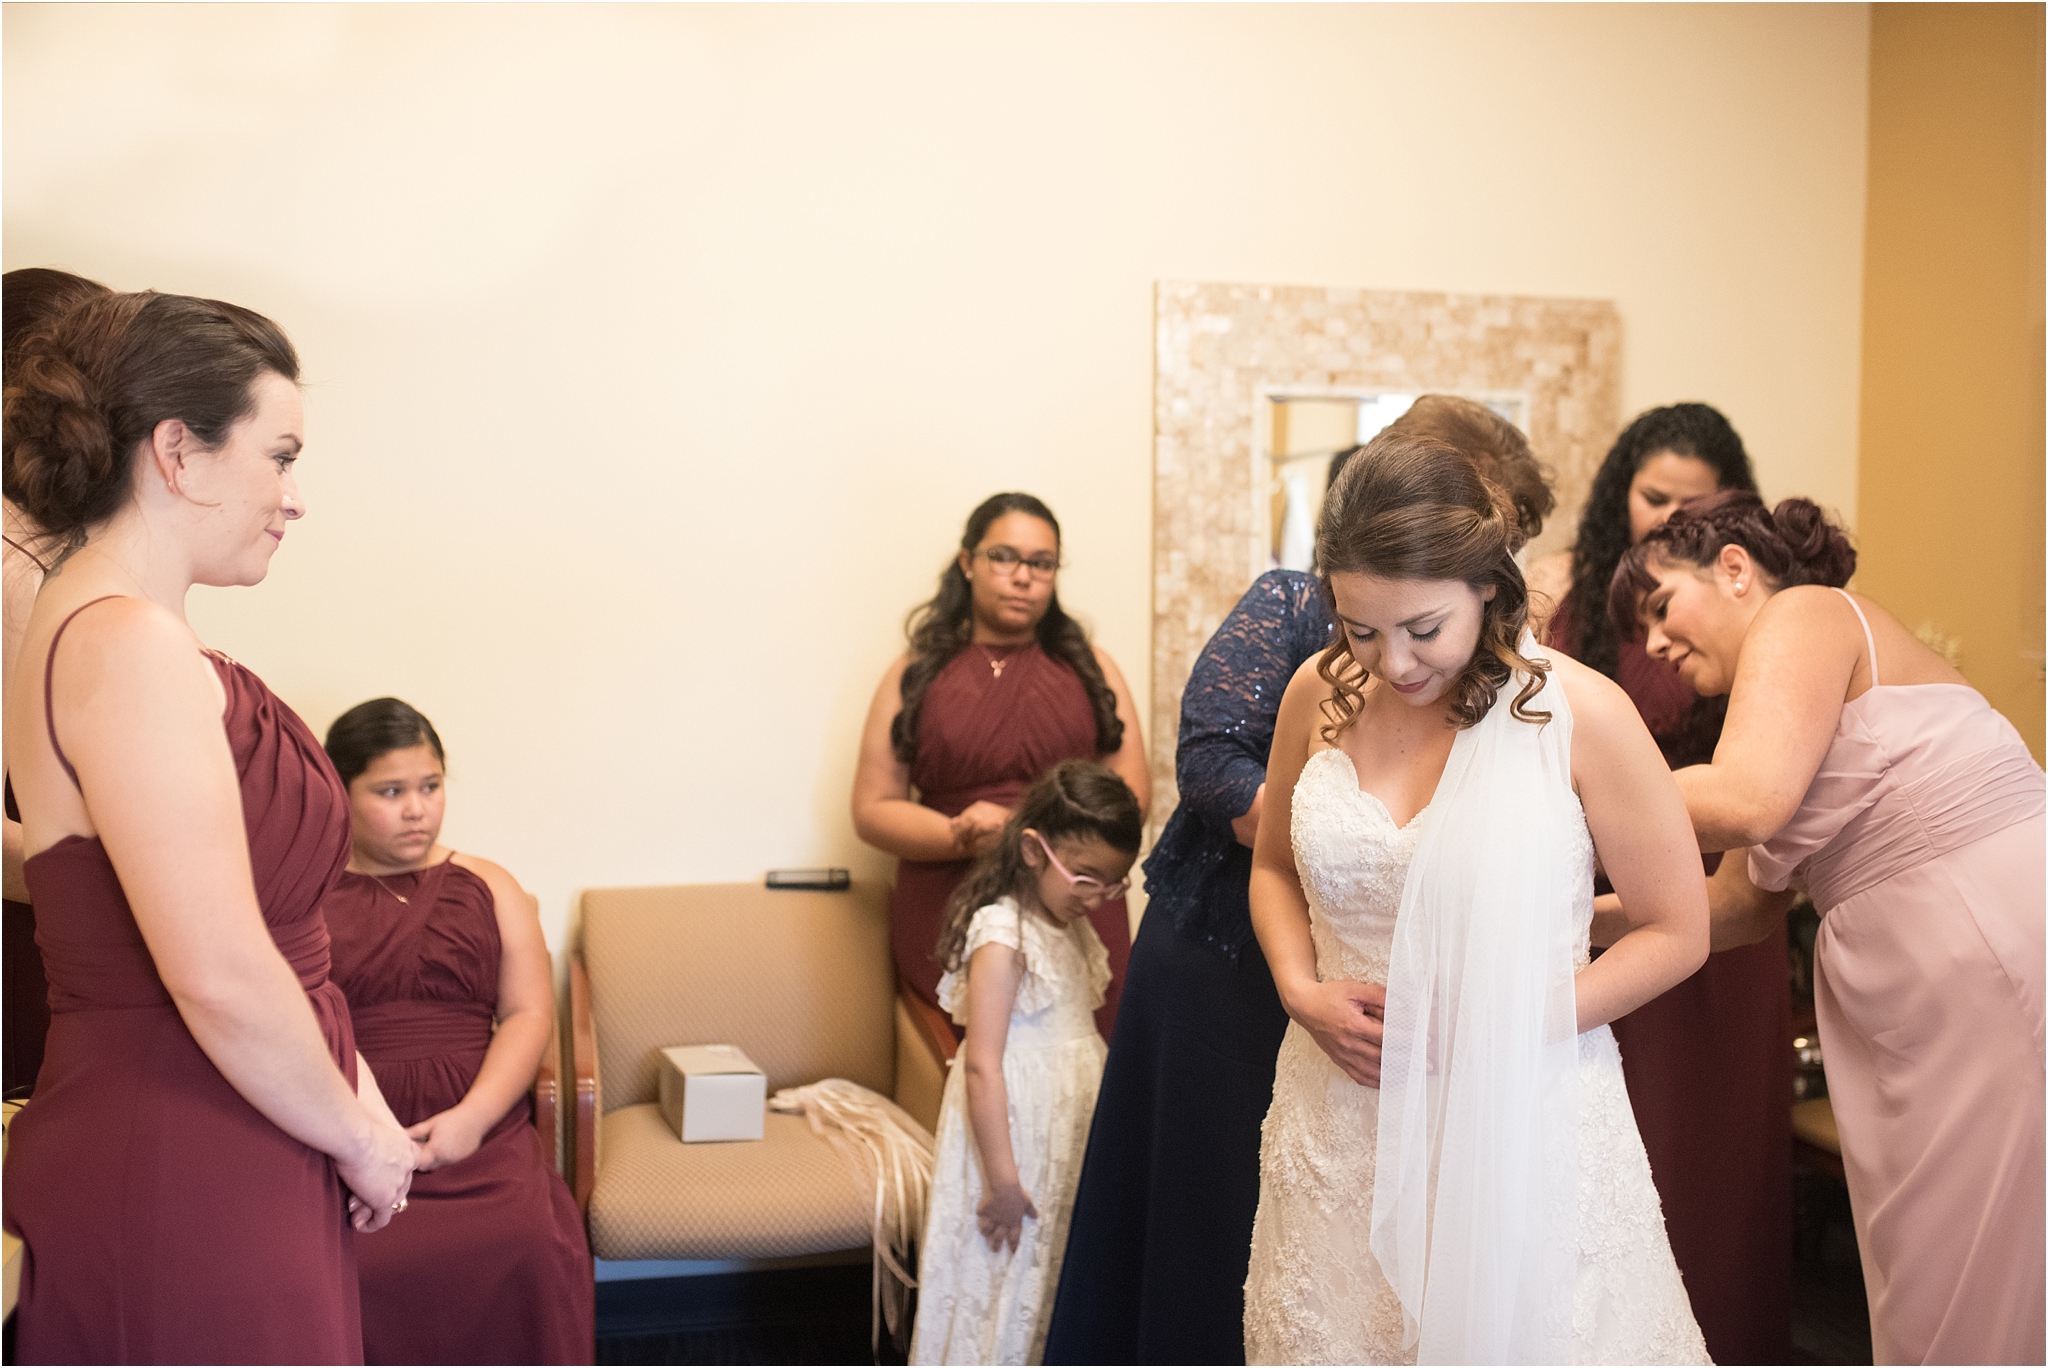 kayla kitts photography - albuquerque wedding photographer - hairpins and scissors - a cake odyssey - new mexico wedding photographer_0010.jpg